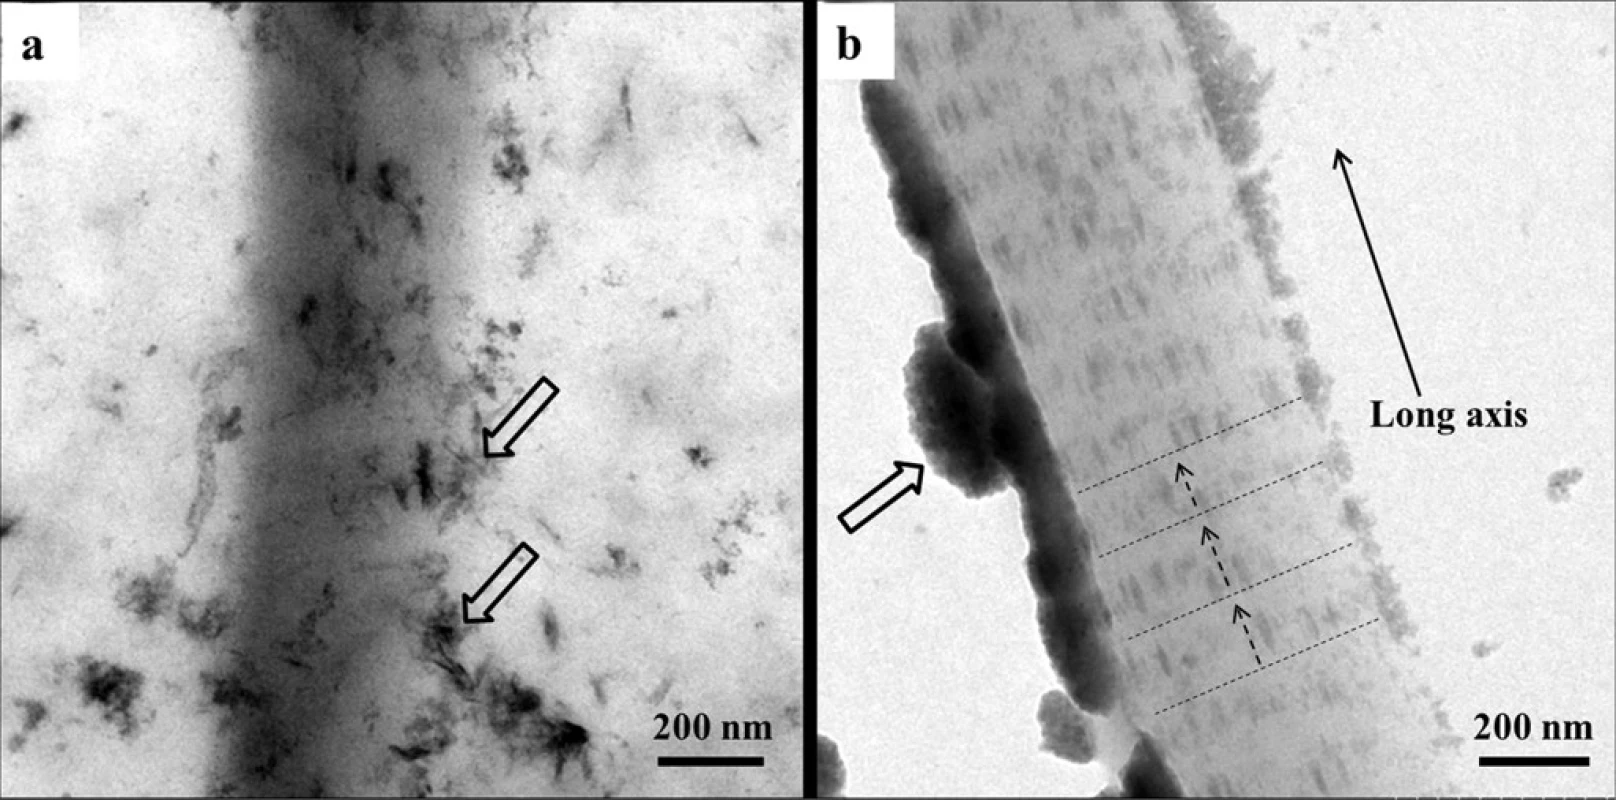 Representative TEM images of unstained samples of collagen fibrils. (a), a collagen fibril mineralized with SBF, the open arrows indicating needle-like crystals as extrafibrillar minerals; (b), a collagen fibril mineralized with nanocomplexes of CMC/ACP regained by dissolving their scaffolds in SBF solution, the open arrows indicating nanocomplexes of CMC/ACP, the dash lines indicating the cross-bandings formed by mineral crystals and the arrows of dash line denoting the orientation of mineral crystals.